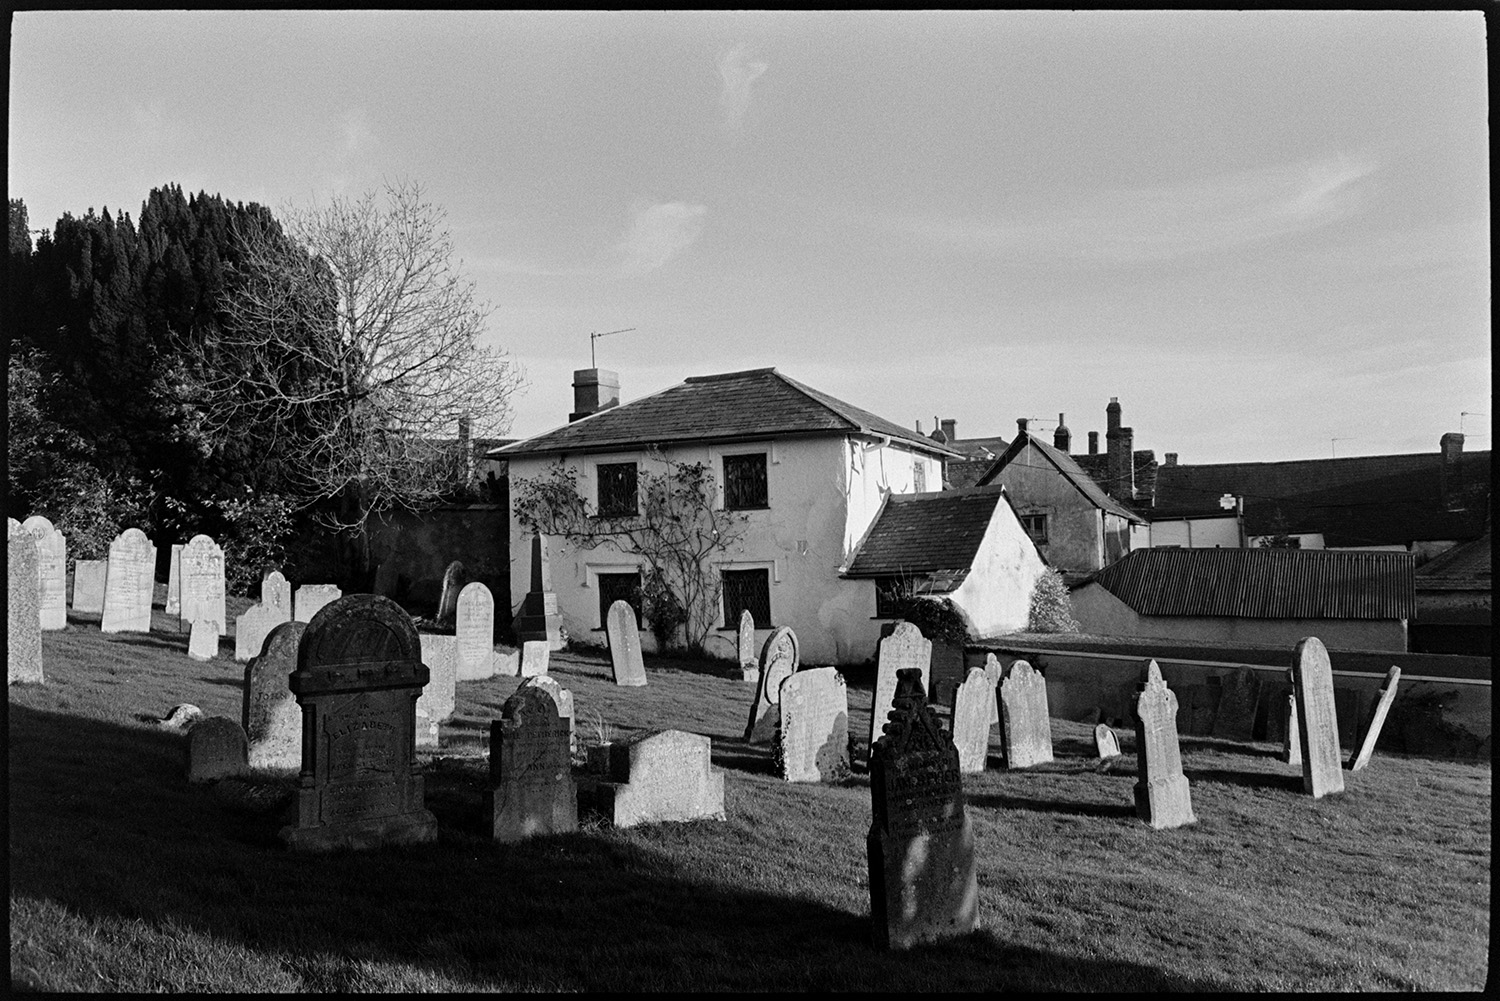 Town graveyard in evening light, houses and distant view. 
[Evening light shining on Hatherleigh churchyard. Shadows are also falling across the churchyard. Houses can be seen in the background, one of which has a rose growing up it.]